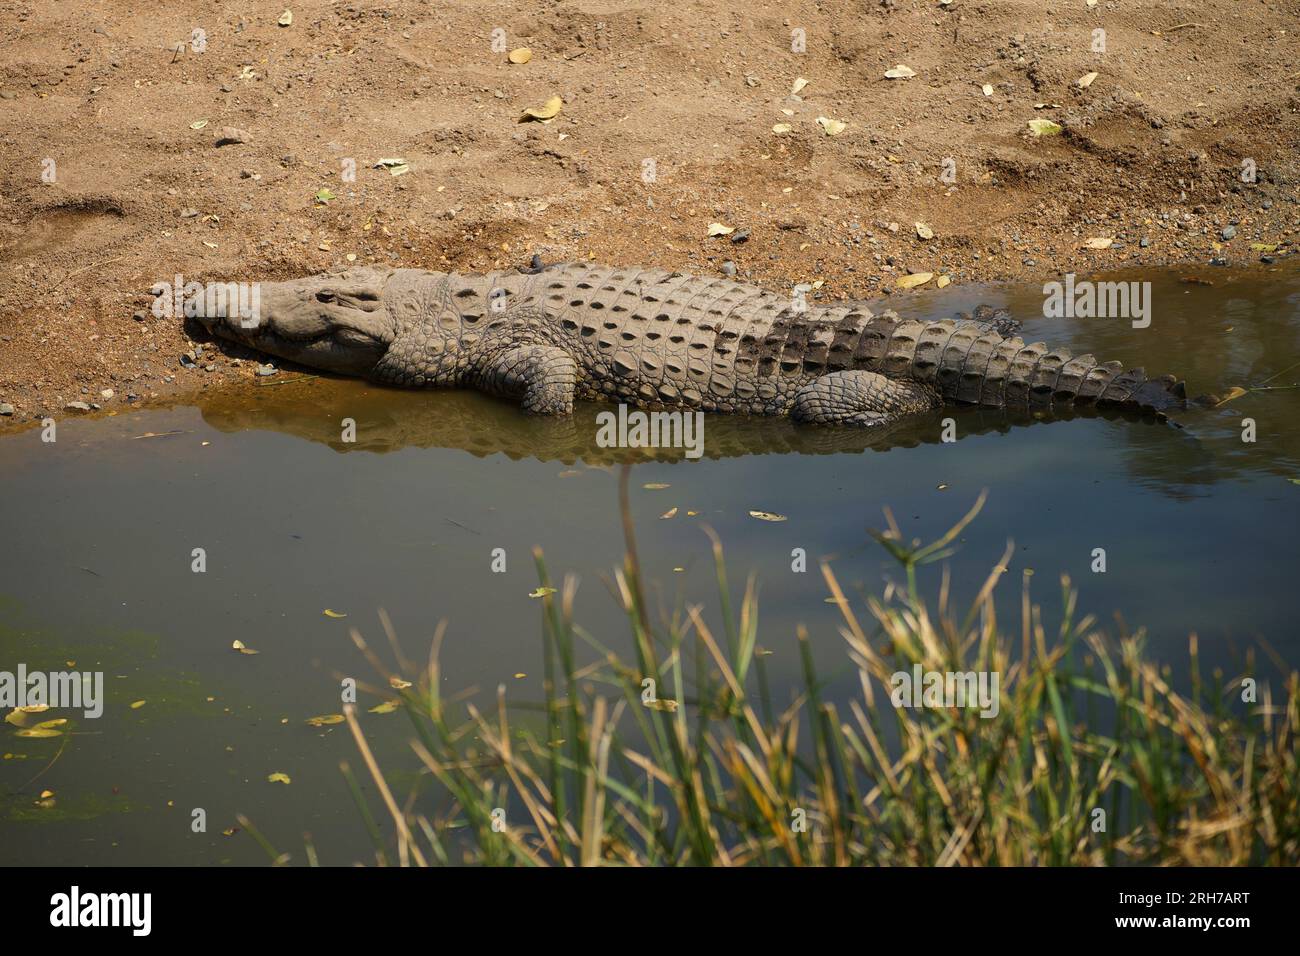 Crocodile in the river in Kruger National Park in South Africa Stock Photo